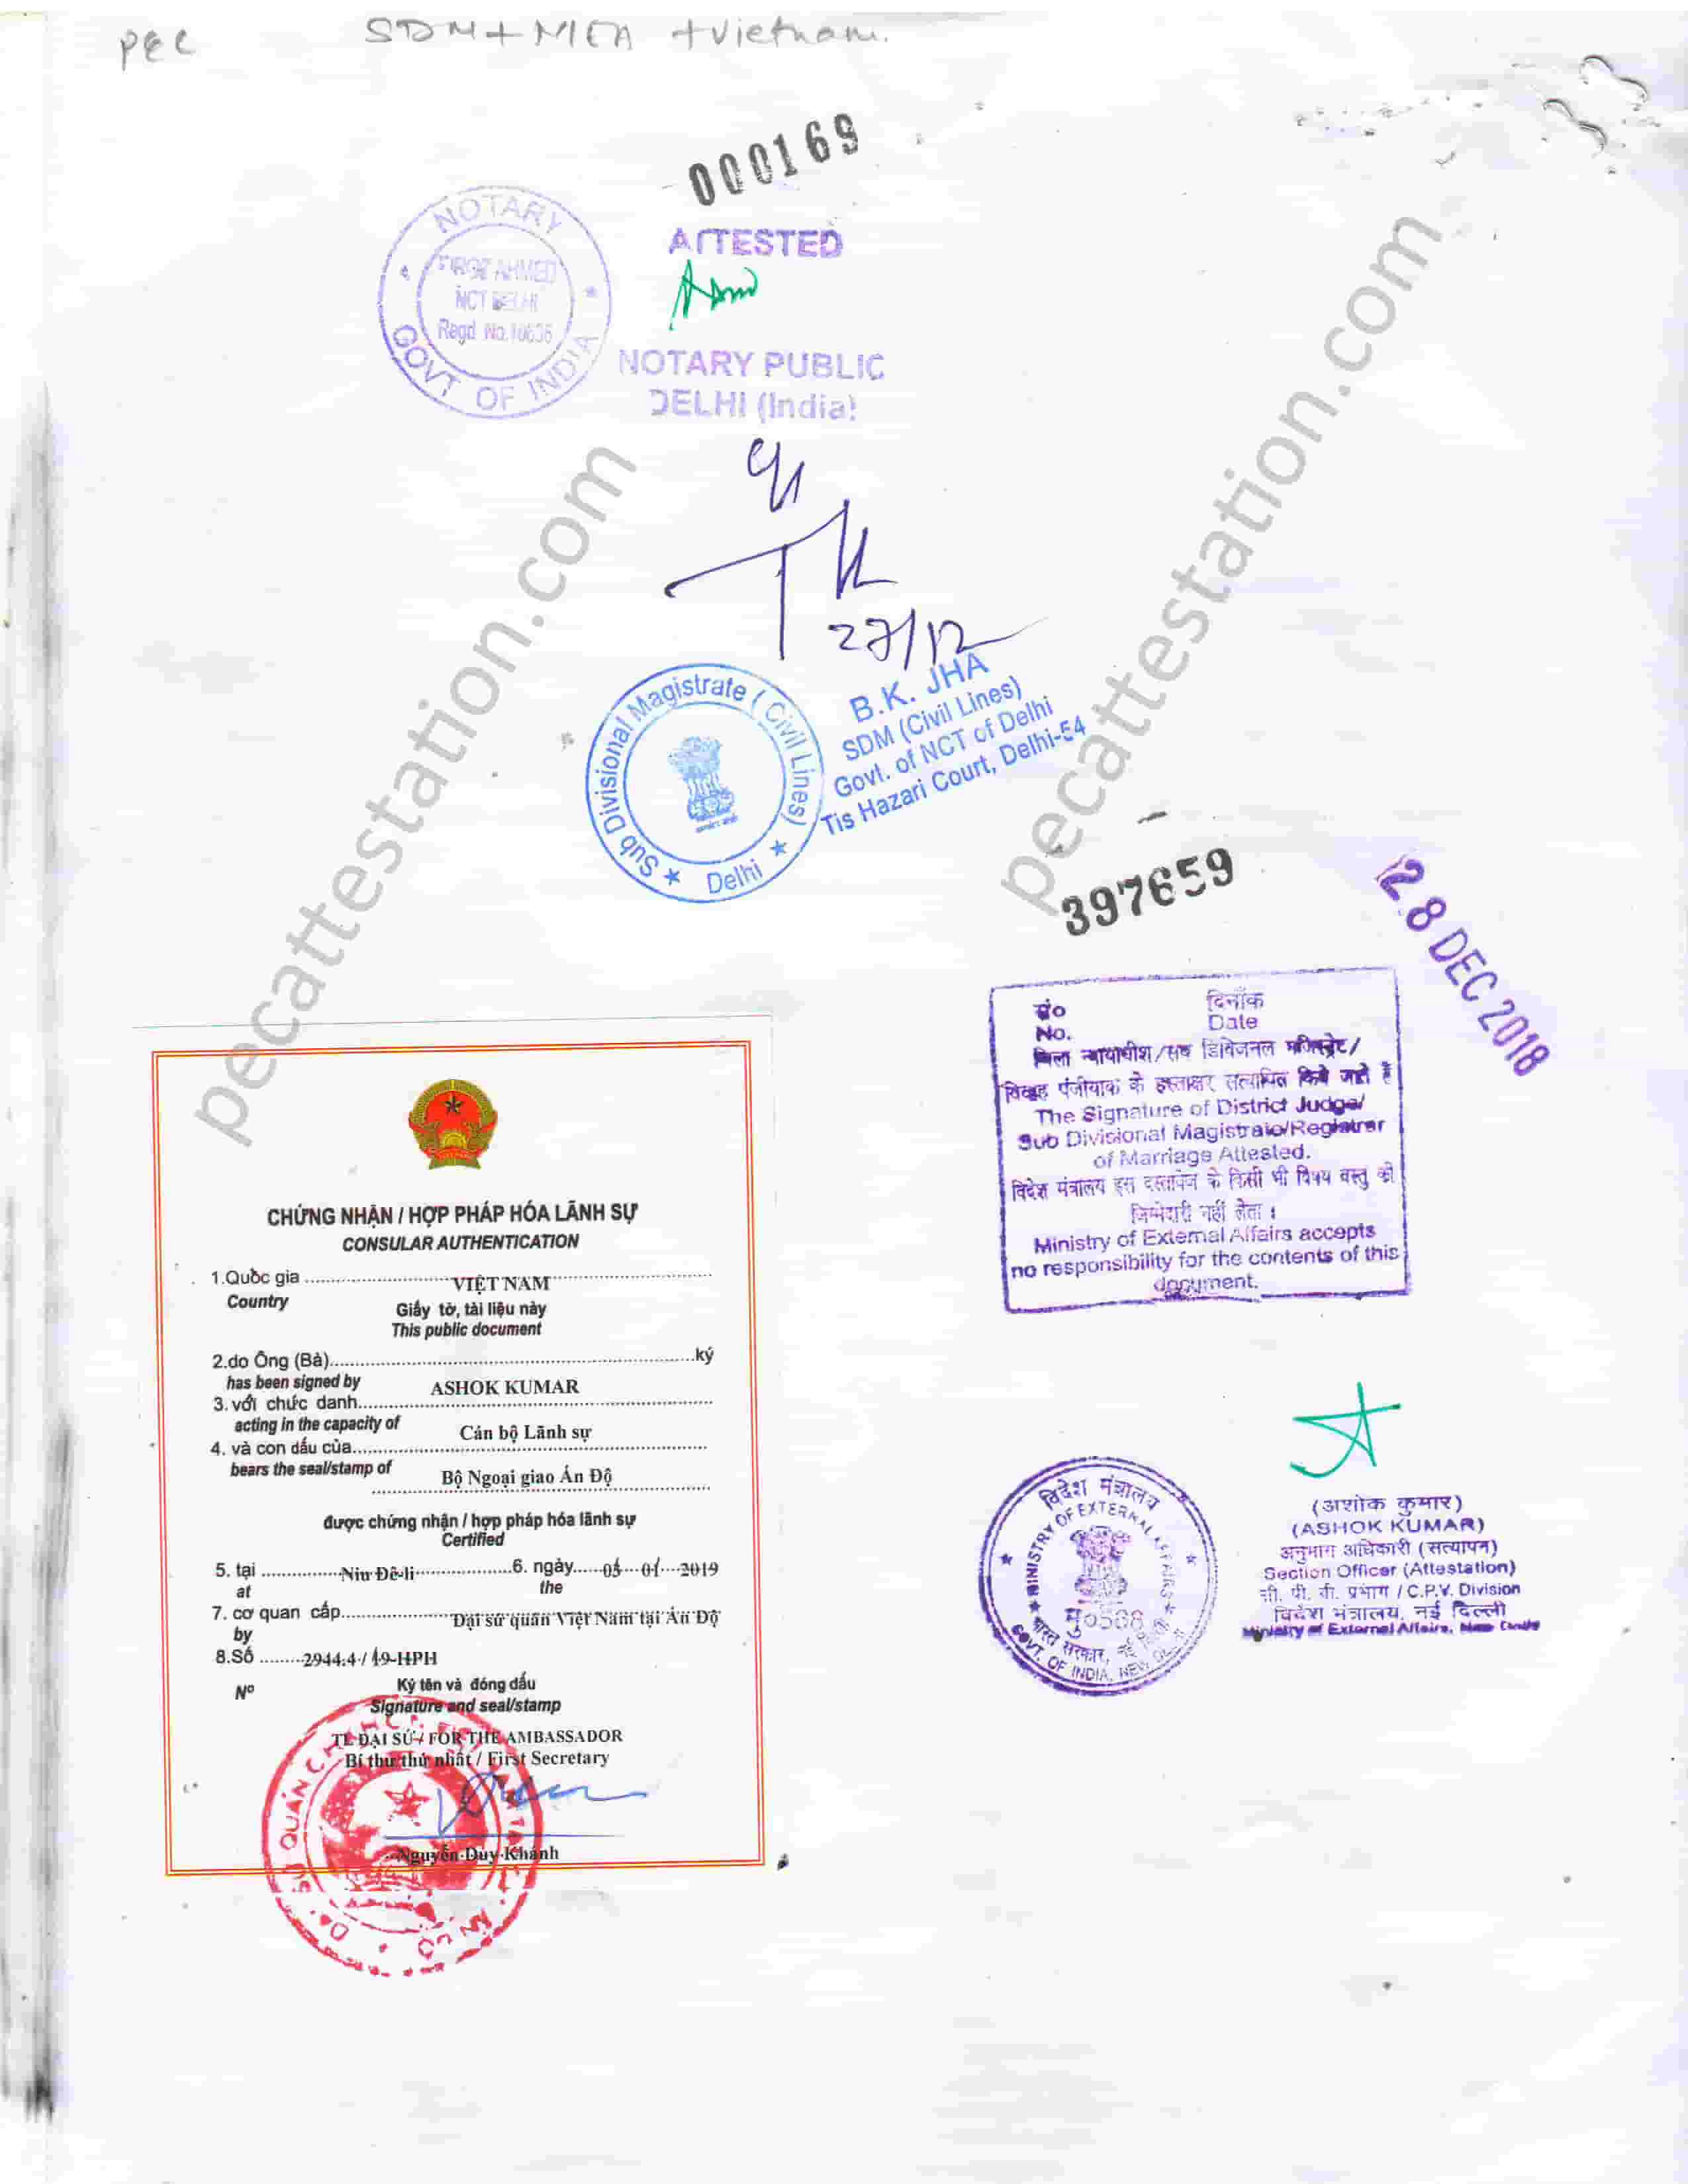 Personal document attestation for vietnam